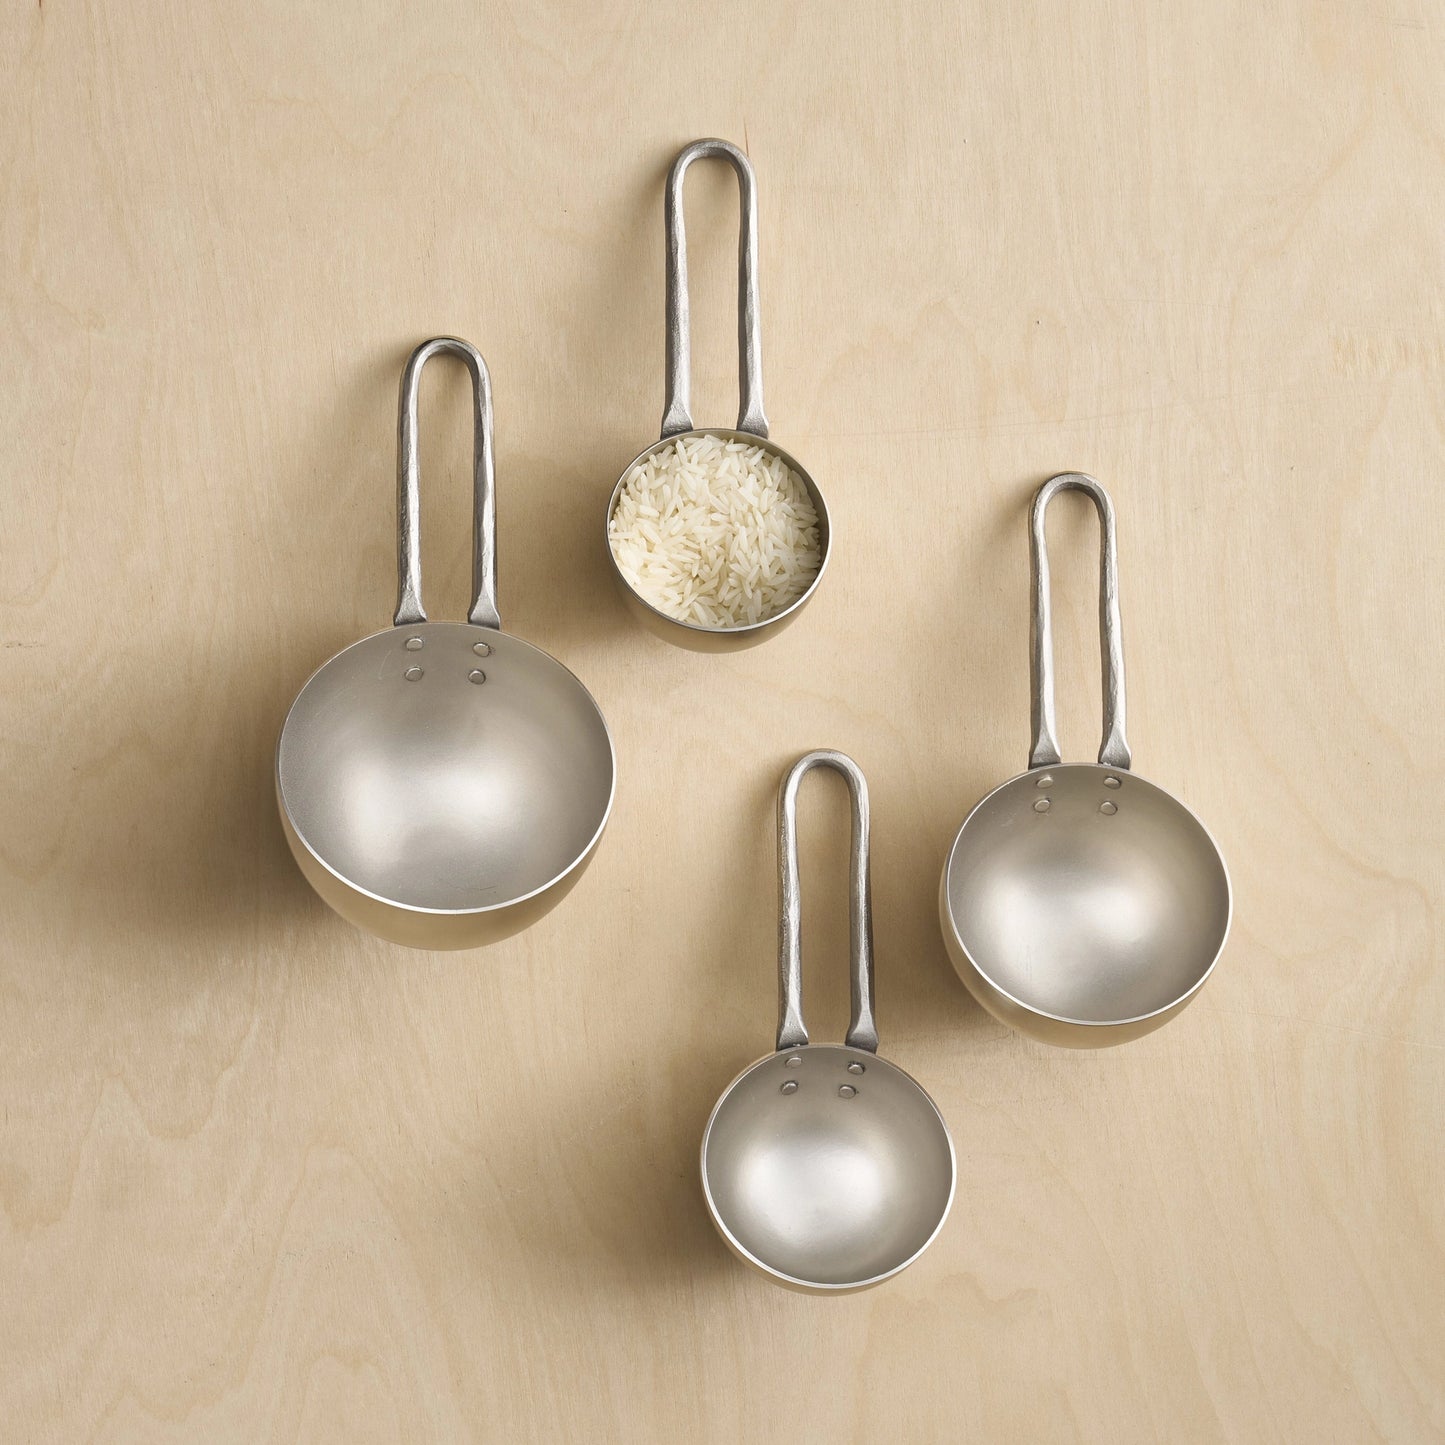 Forge Pewter Measuring Scoops Set of 4